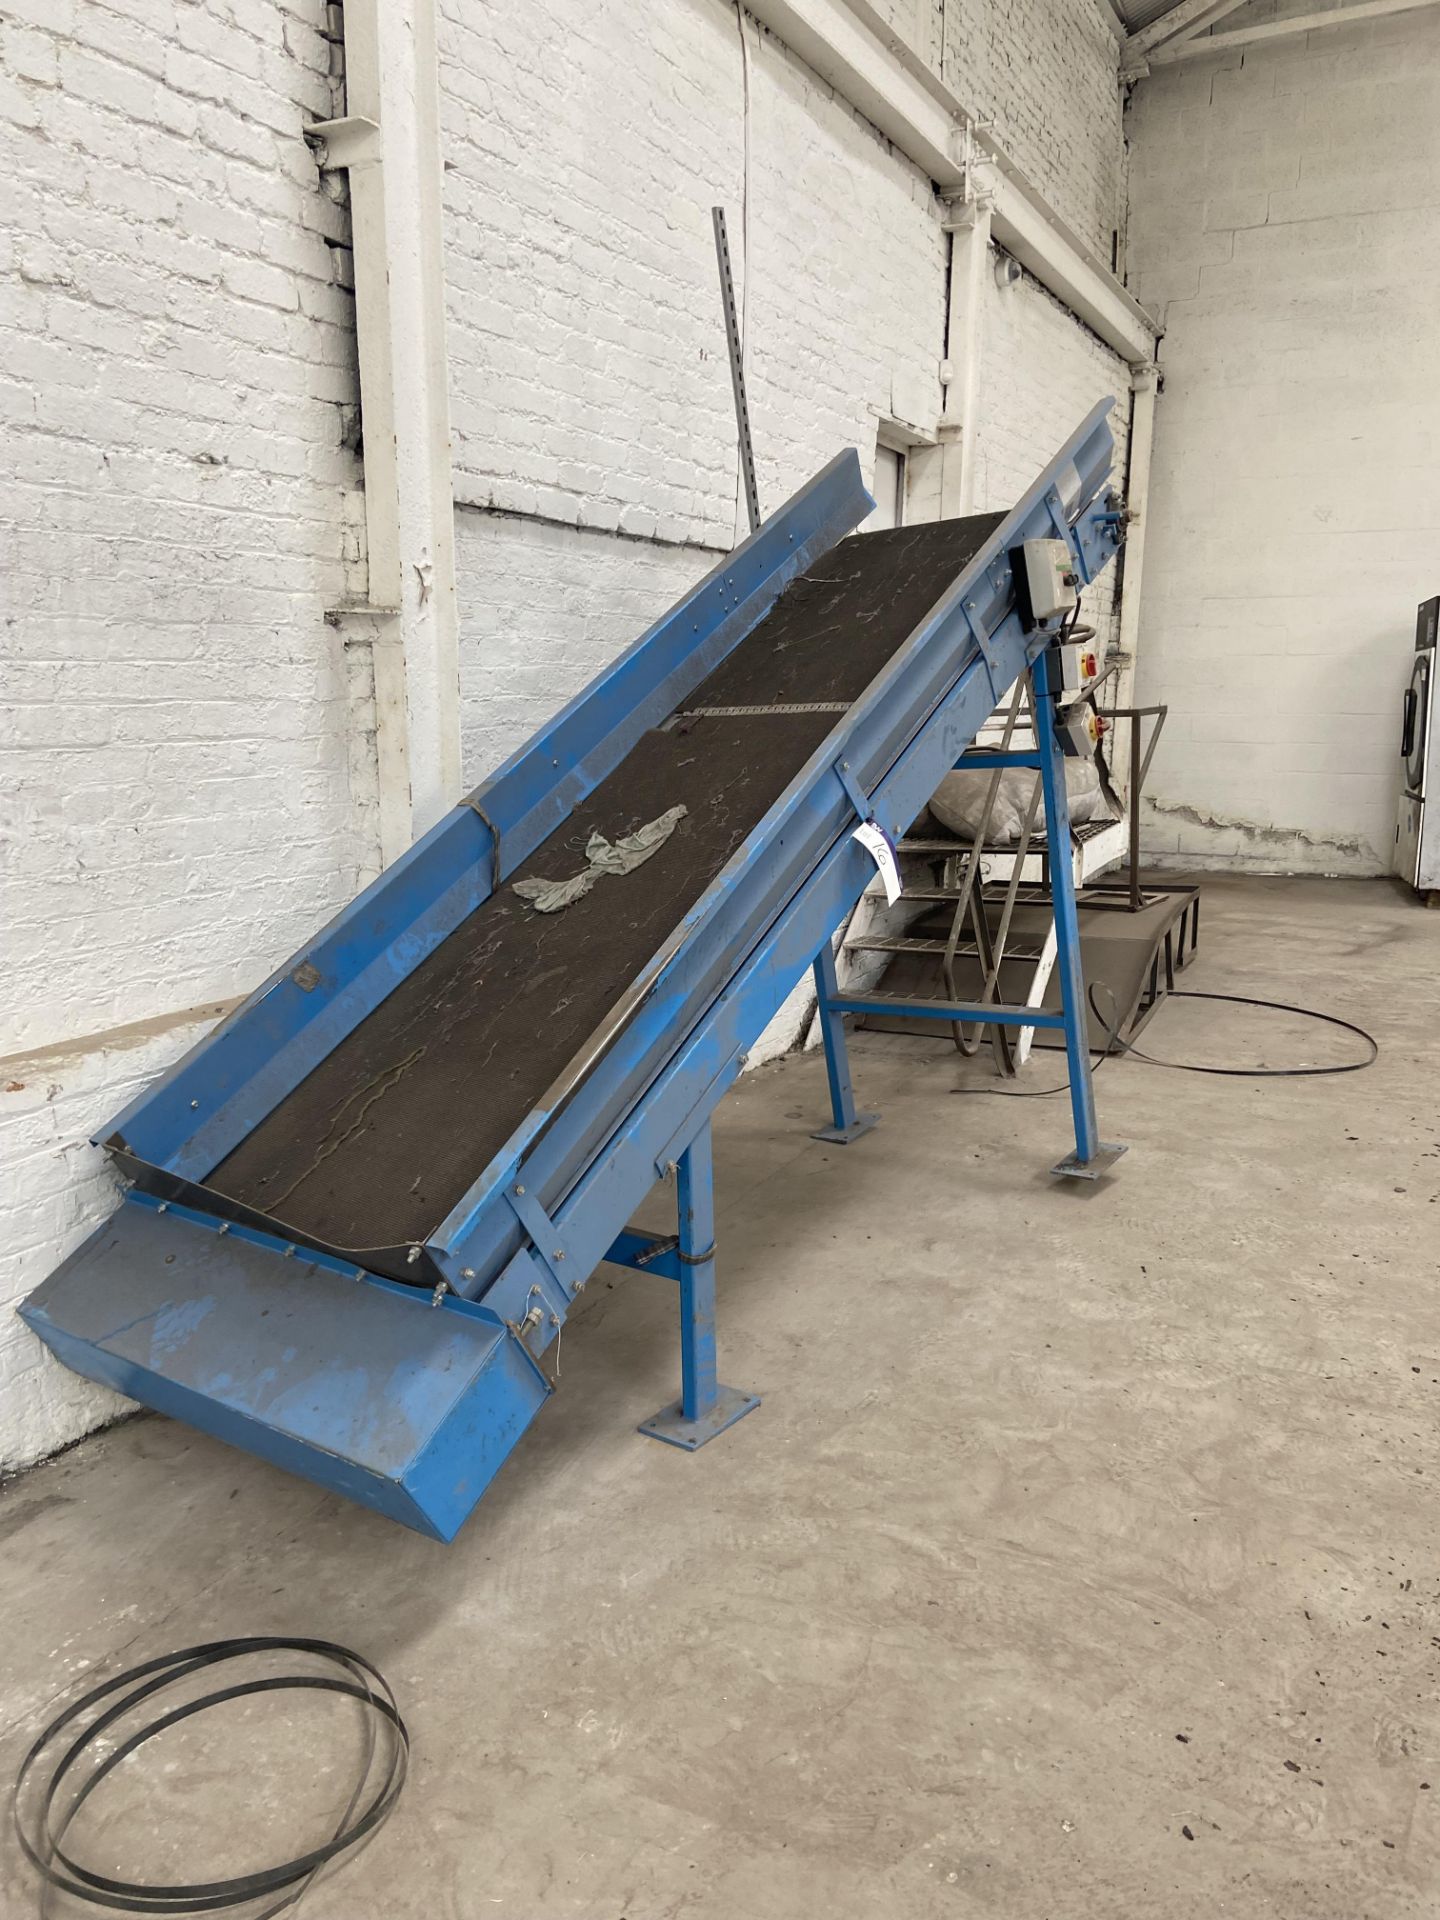 INCLINED BELT CONVEYOR, approx. 850mm wide on belt x 3.3m long, with two steel supports Assistance